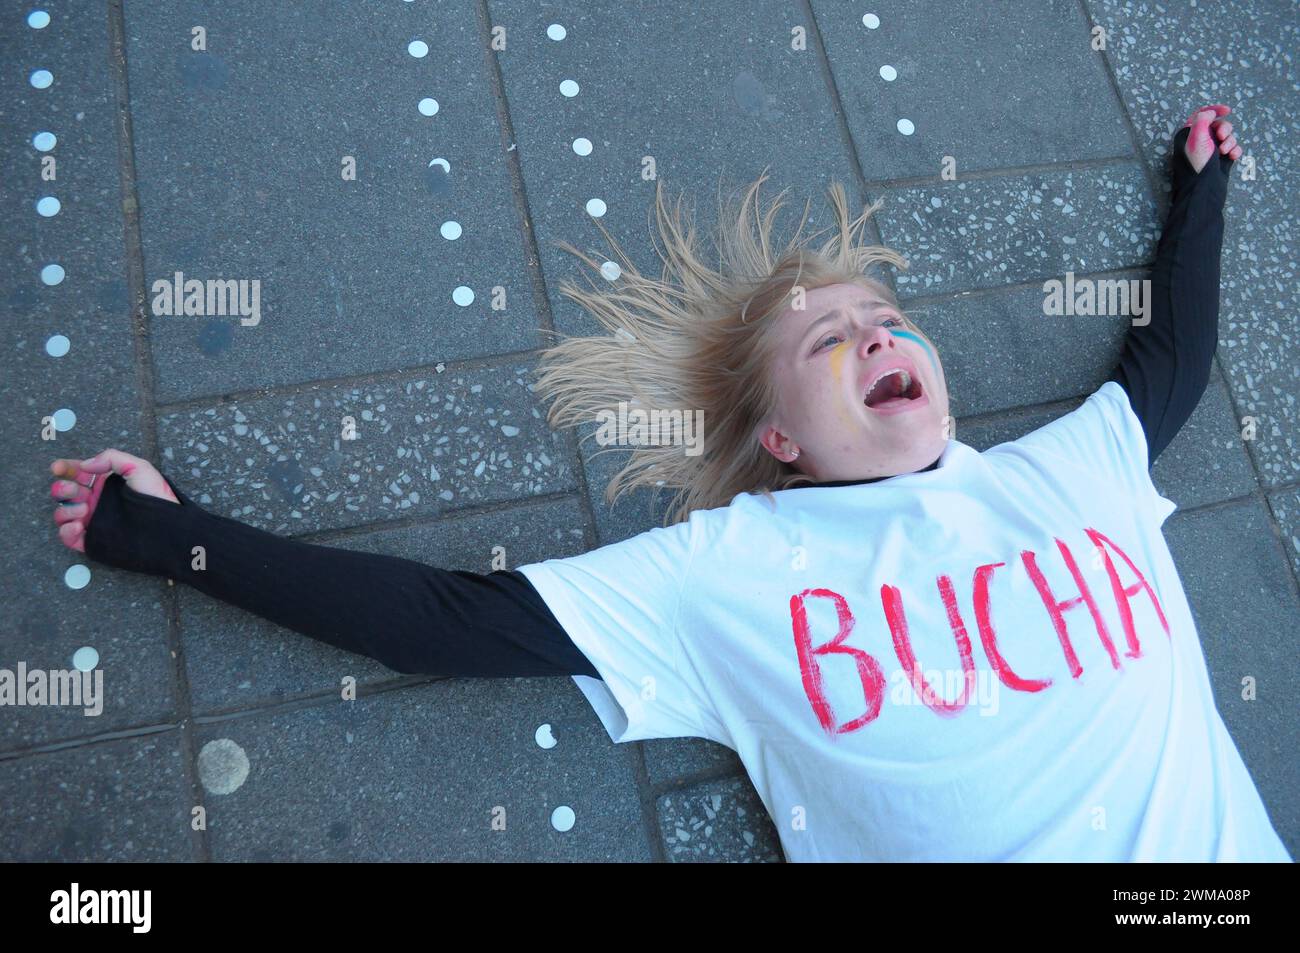 A pro-Ukraine demonstrator wearing a t-shirt with a name of a Ukrainian city written on it, performs a 'die-in' protest in Times Square. Demonstrators rallied in Manhattan, New York City on the two-year anniversary of the Russian invasion of Ukraine. Protestors condemned the invasion and opposed Russian President, Vladimir Putin. Last weekend, Russian forces captured the eastern Ukrainian city of Avdiivka located on the front line. The loss of the city comes as a $60 billion aid package for Ukraine from the United States has been stalled following disagreements in Congress. Ukrainian President Stock Photo